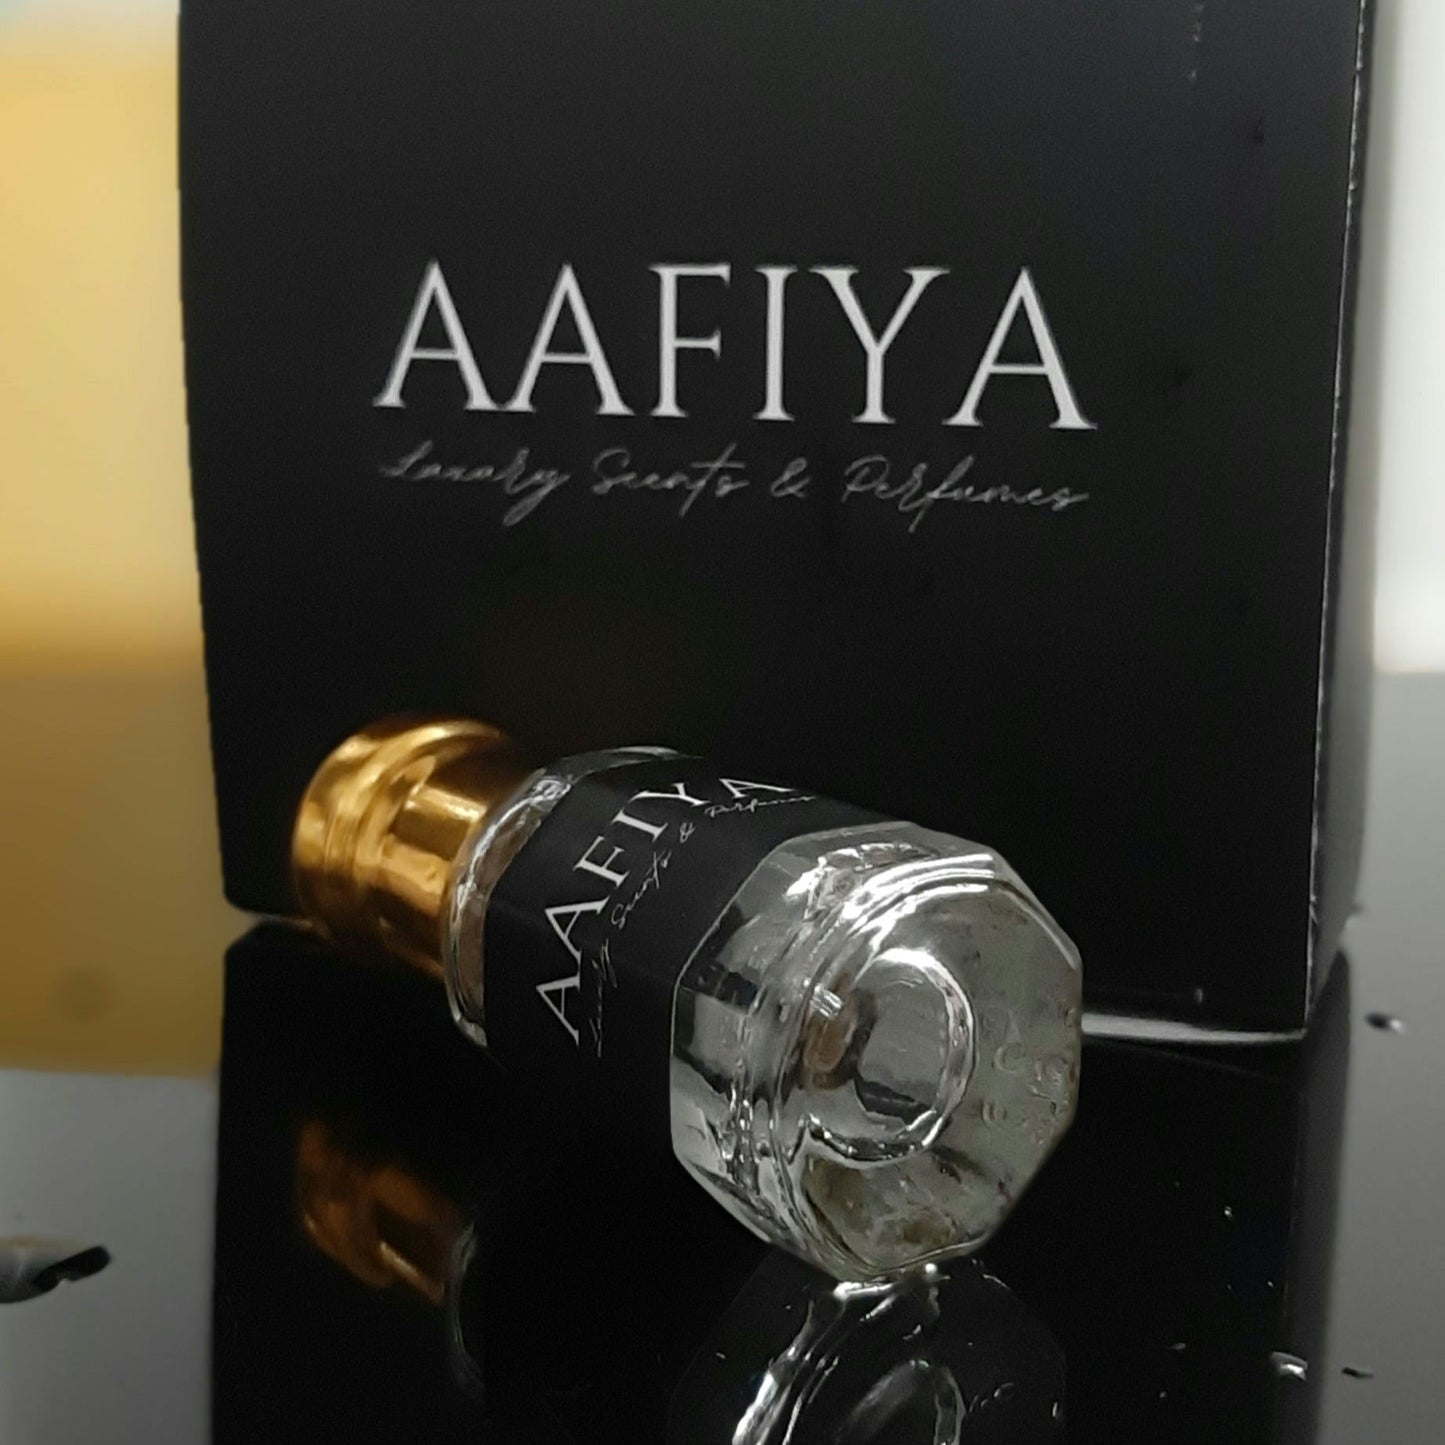 Couture Gold - Aafiya Luxury Scents & Perfumes